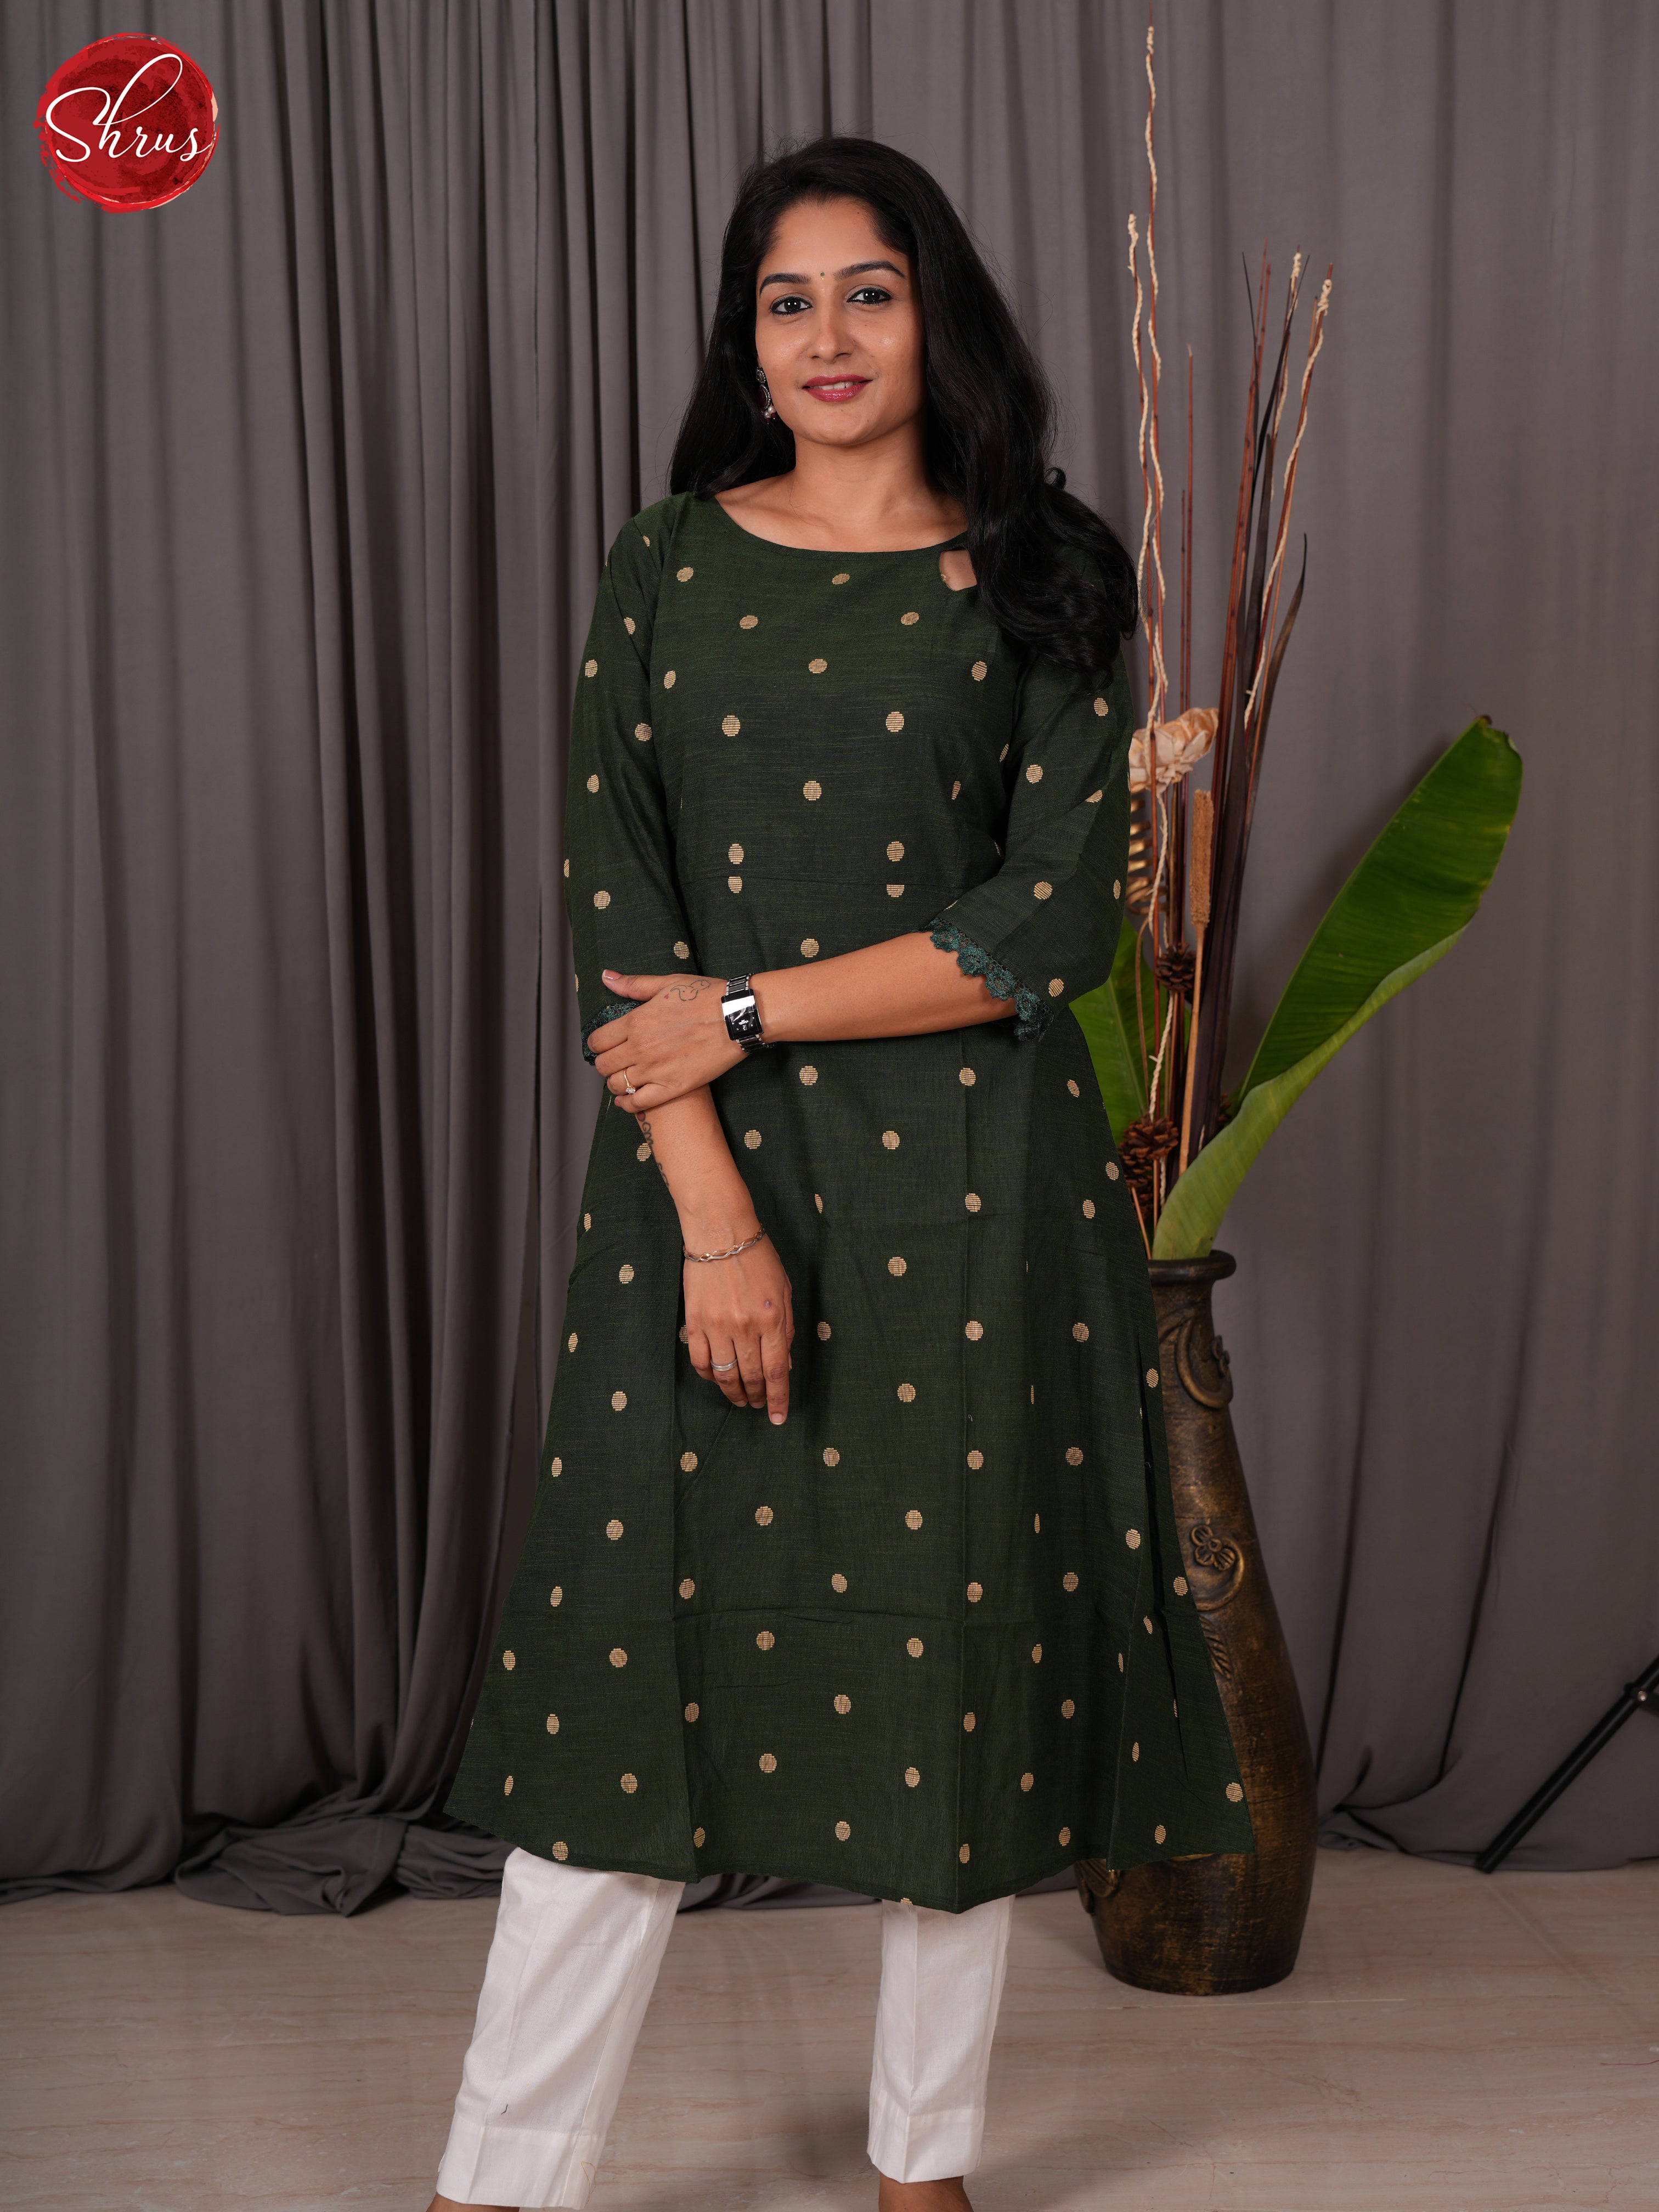 Green -Readymade Suits - Shop on ShrusEternity.com